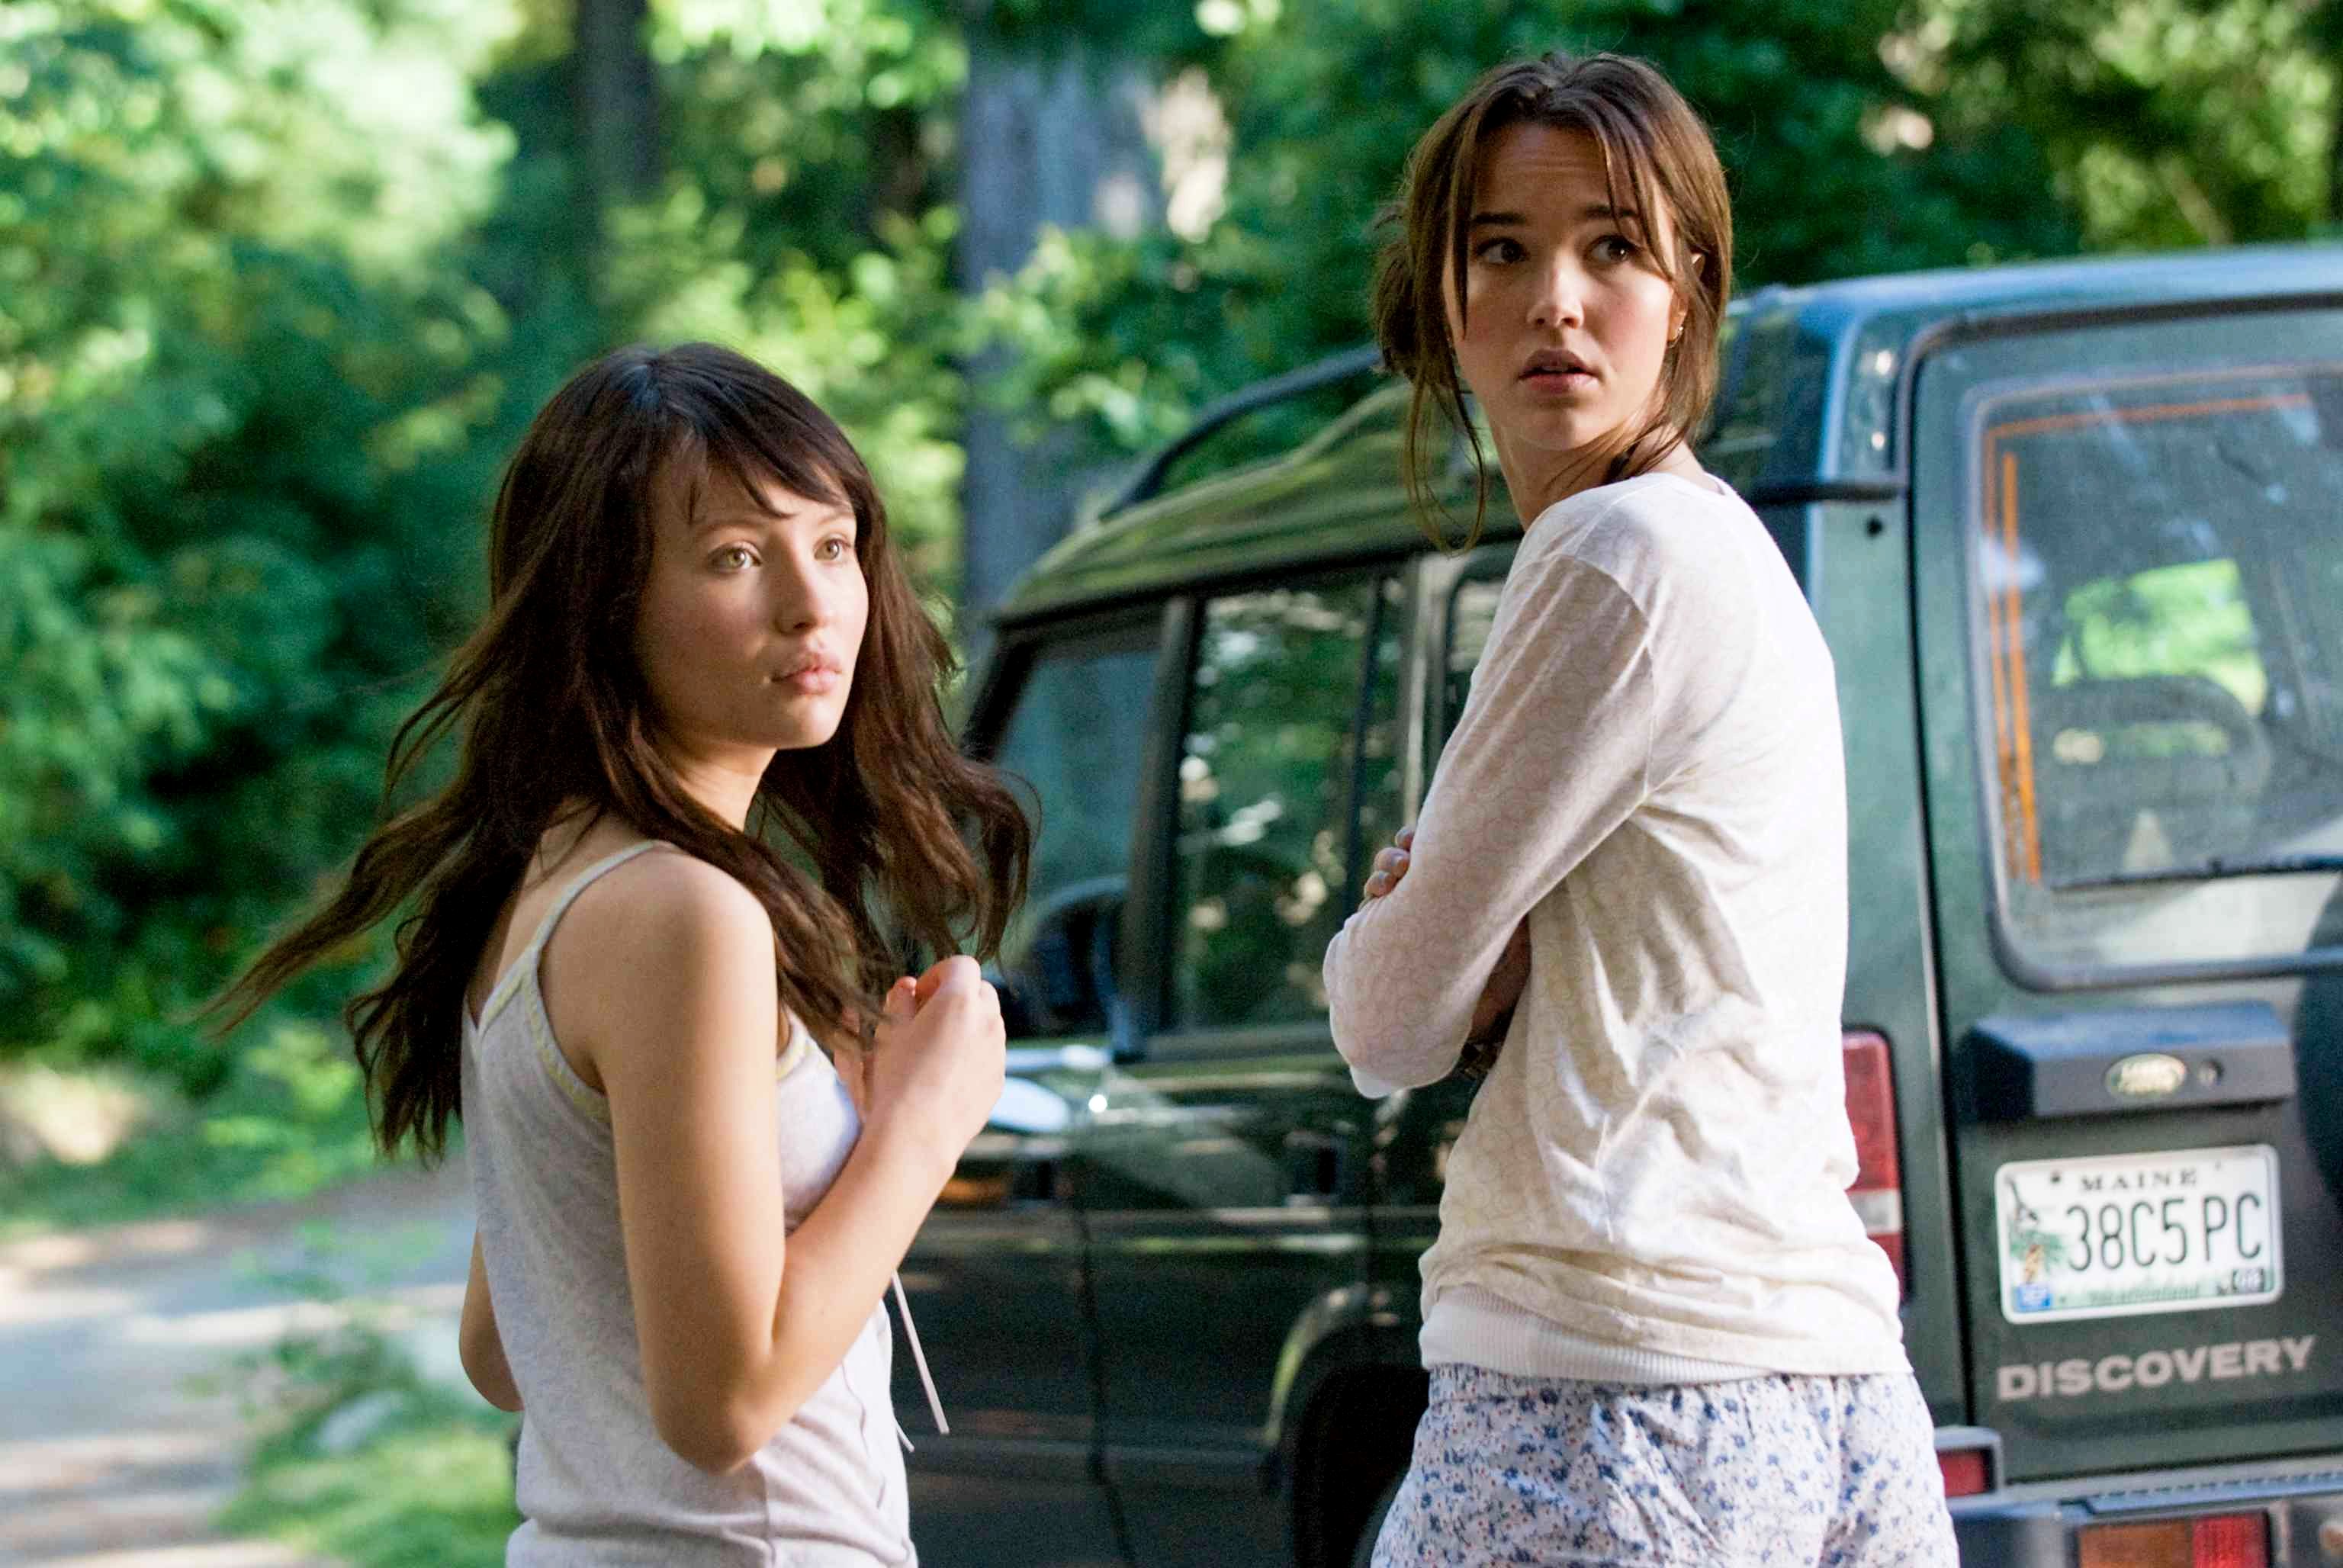 Emily Browning stars as Anna and Arielle Kebbel stars as Alex in DreamWorks' The Uninvited (2009). Photo credit by Kimberley French.